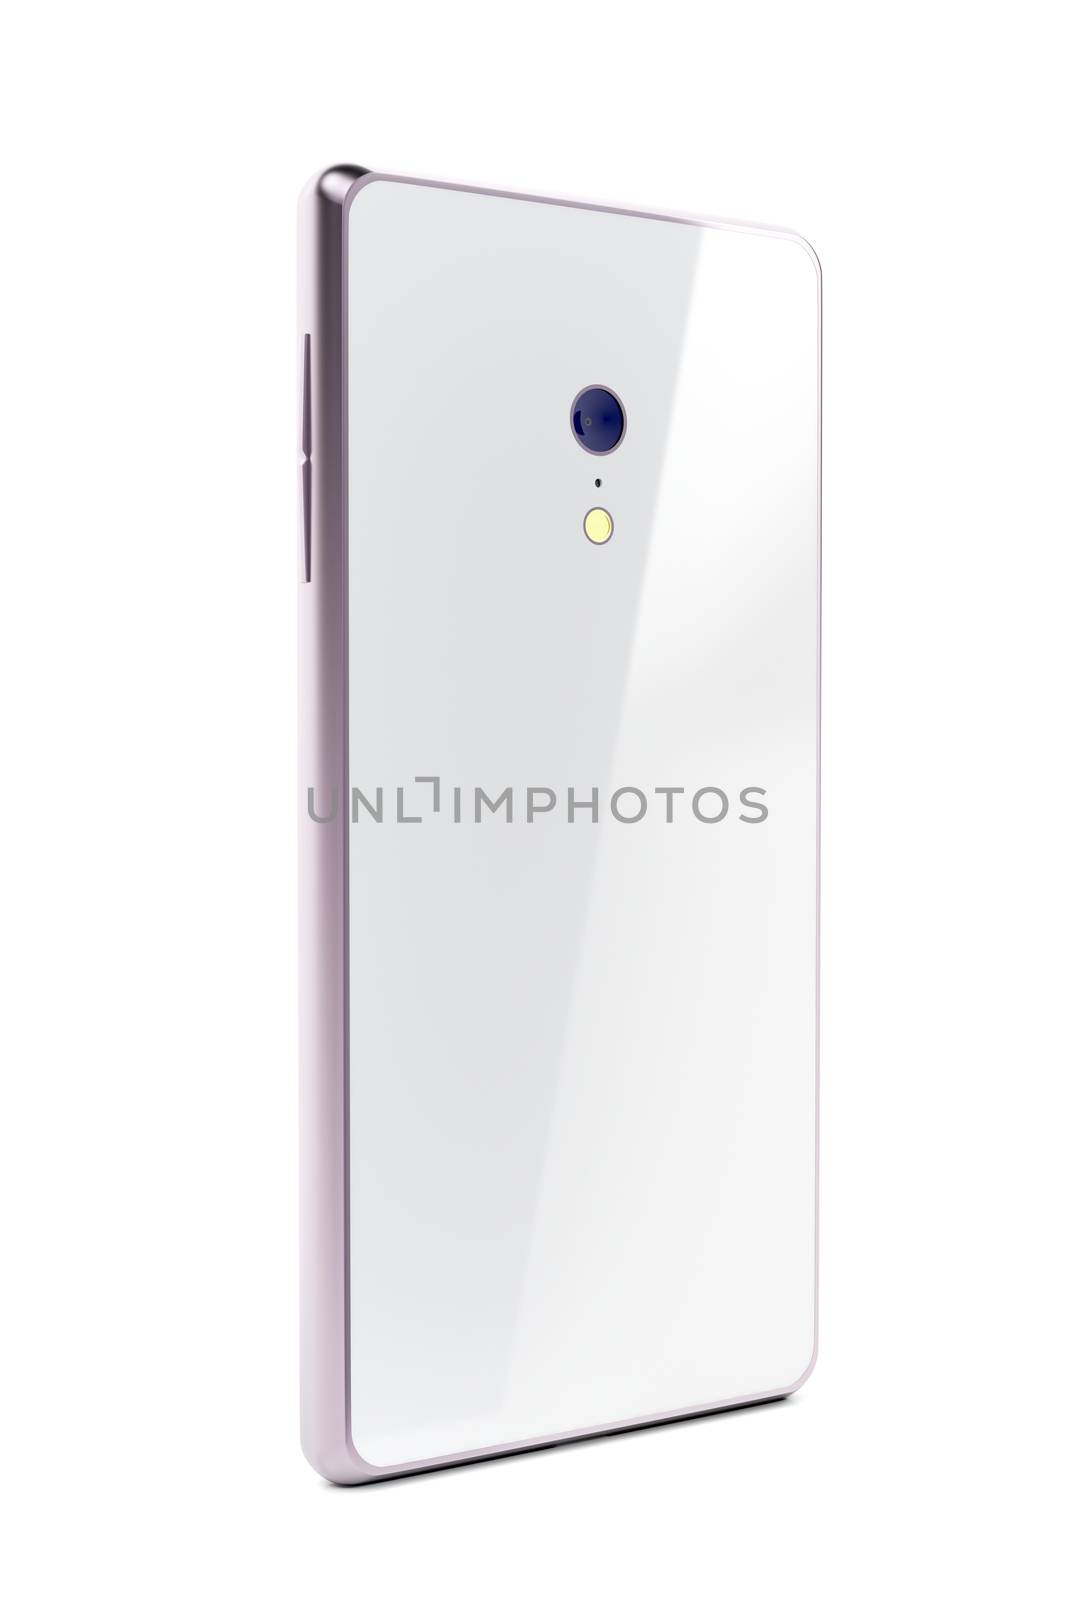 Back view of smartphone by magraphics